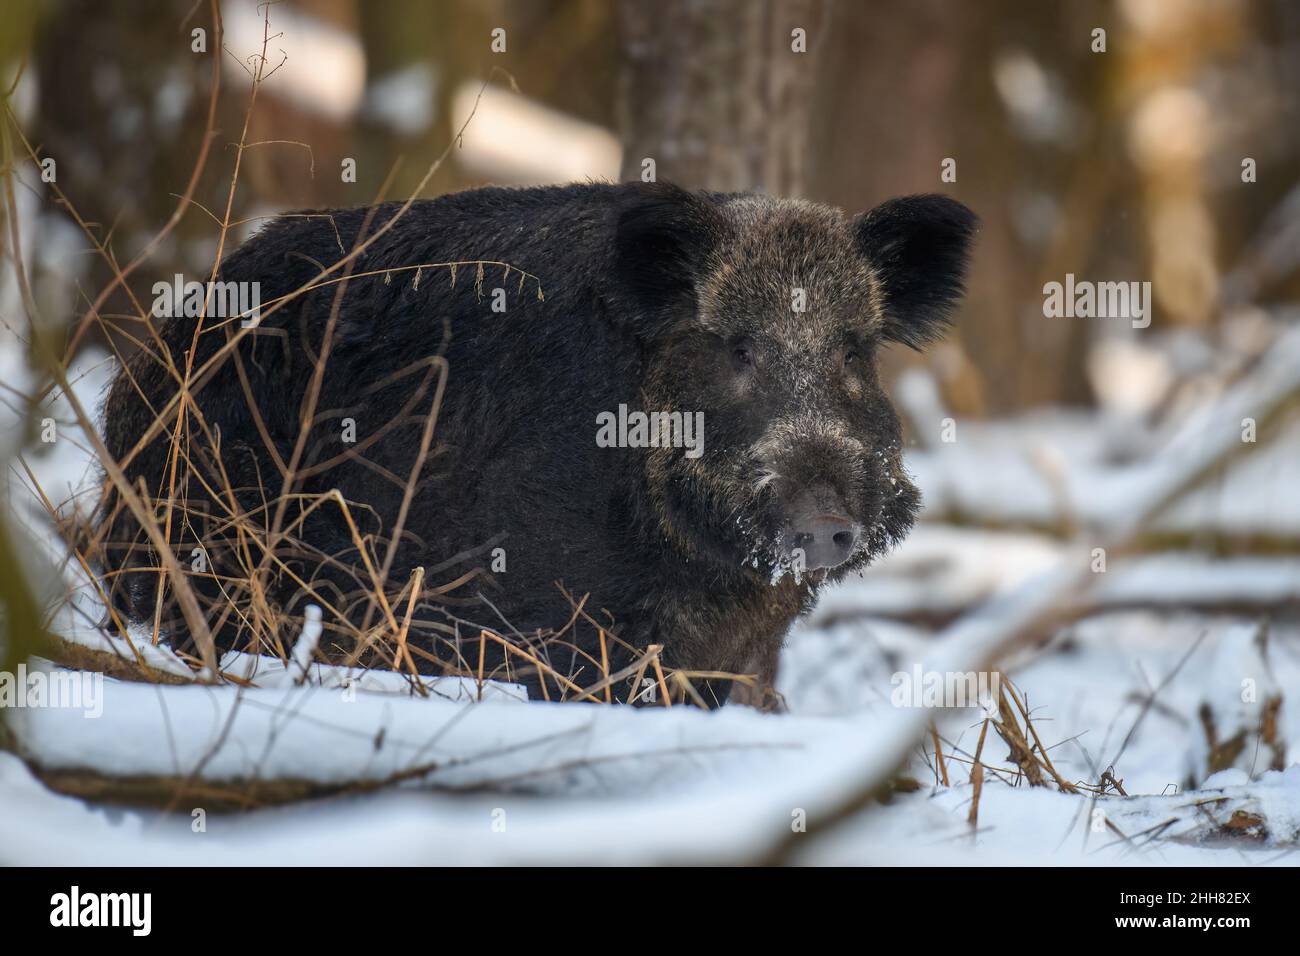 Wild pig with snow. Young Wild boar, Sus scrofa, in wintery forest. Wildlife scene from nature Stock Photo